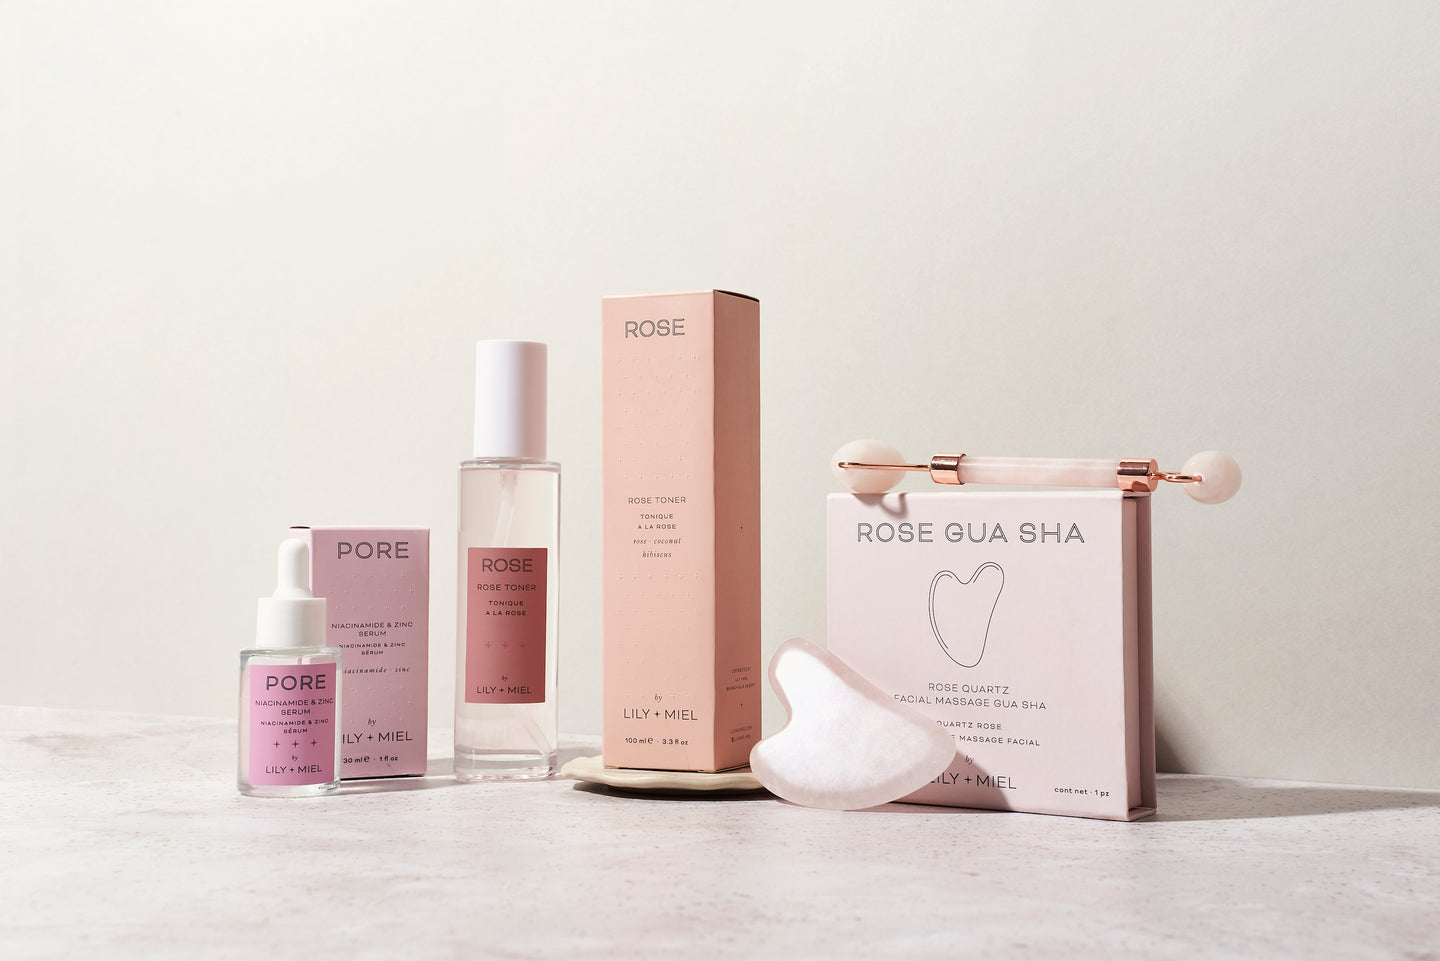 skincare products. rose toner. gua sha. skincare gift sets. gifts for women. gifts for teenagers. facial massage roller. niacinamide serum. Christmas gifts. birthday gift sets. facial toning. tone face. presents for her. pink gifts.